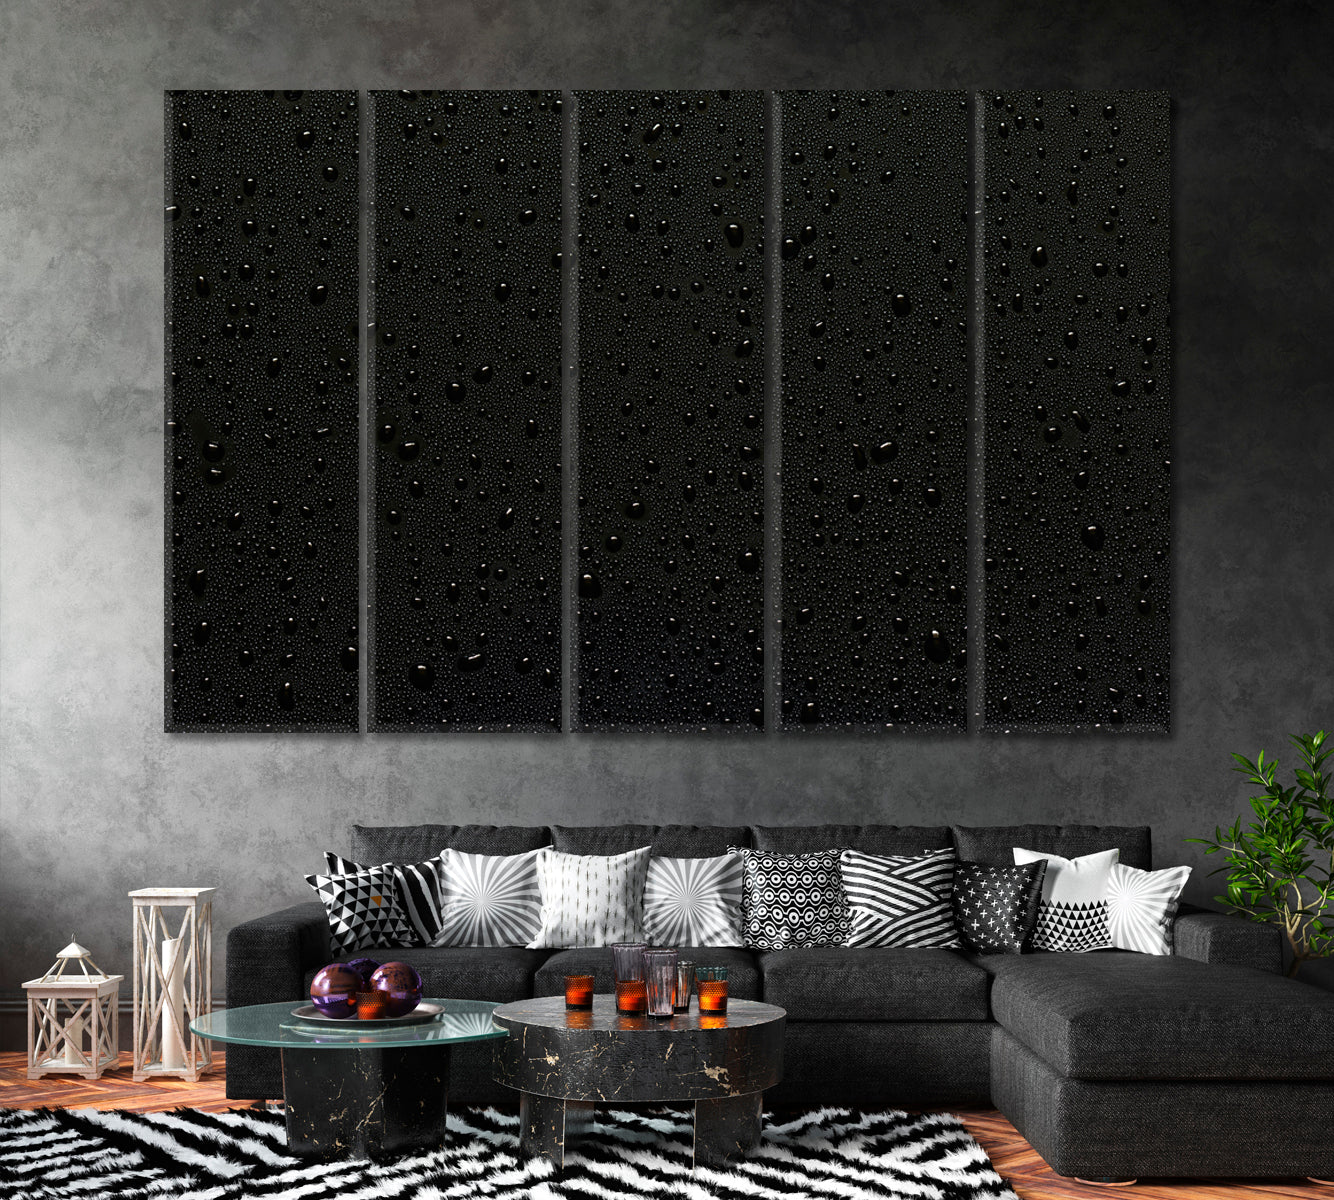 Water Droplets Canvas Print ArtLexy 5 Panels 36"x24" inches 